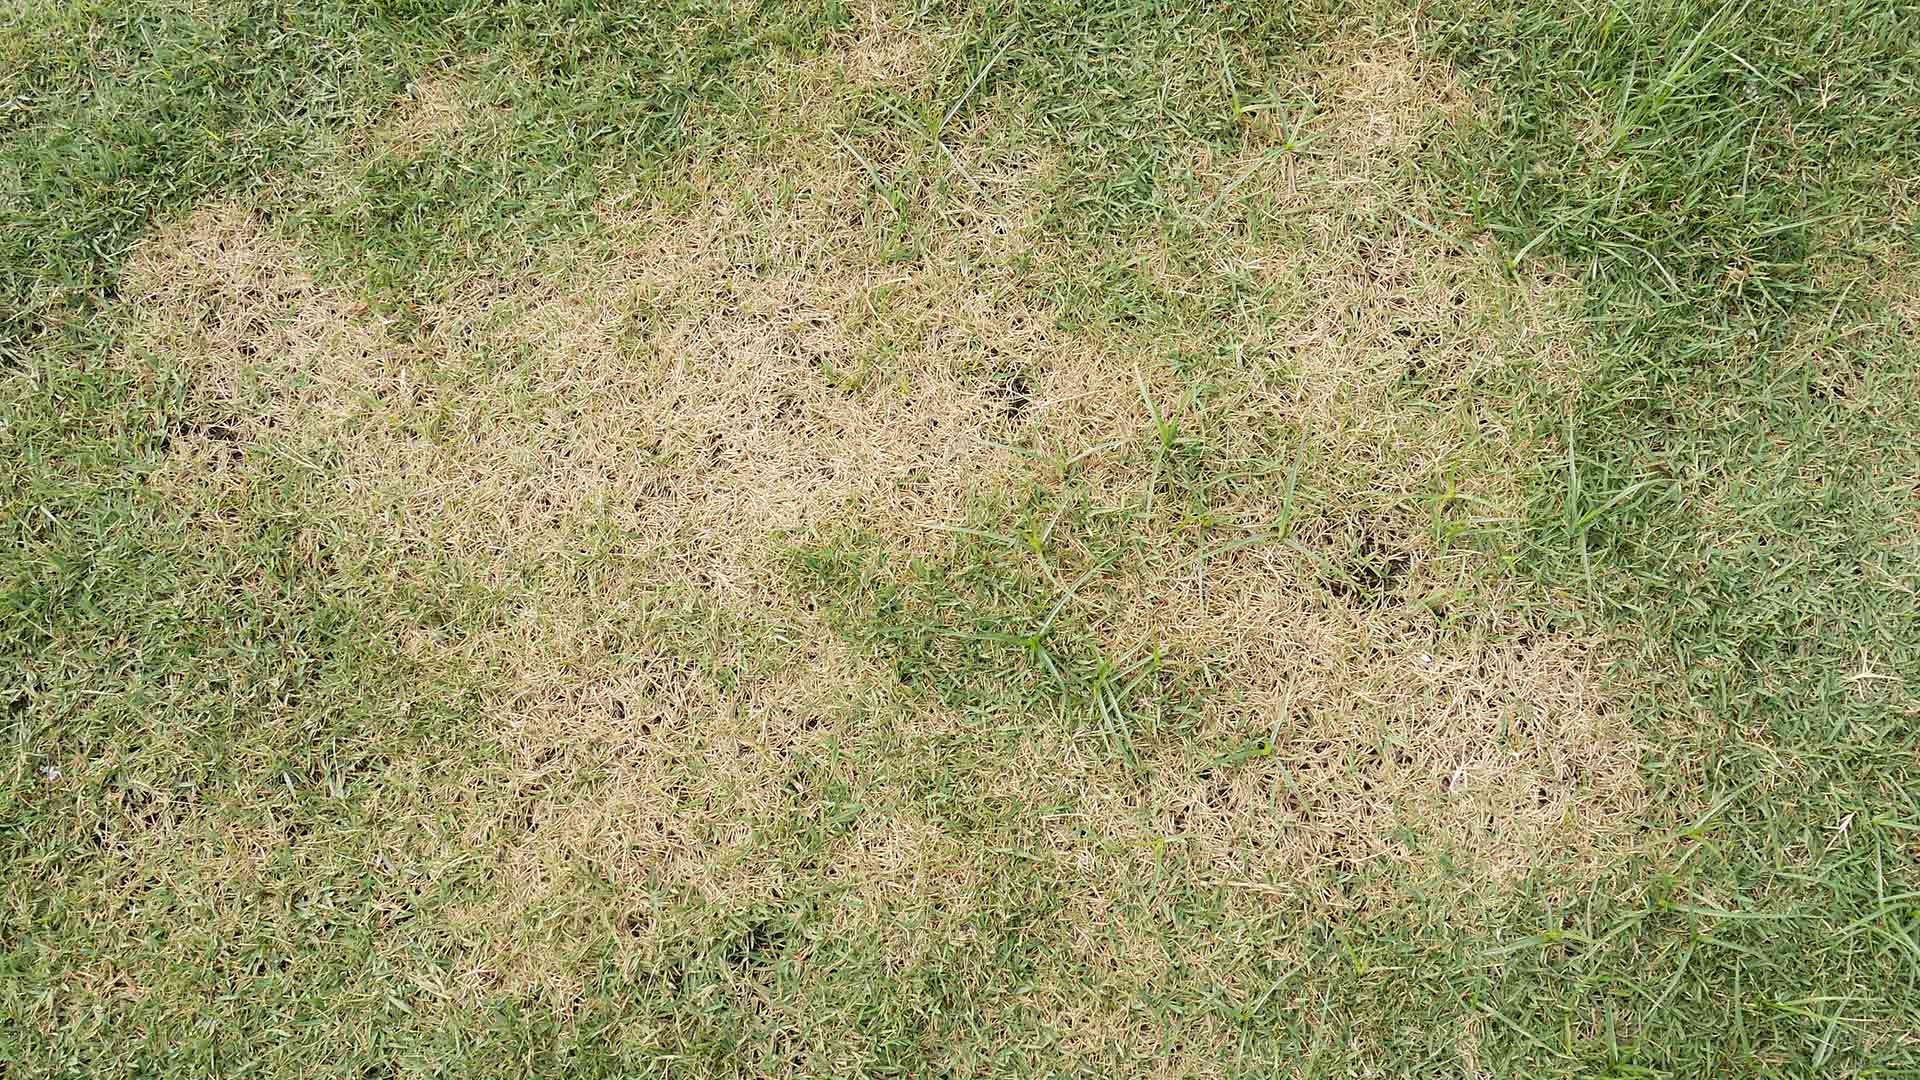 Patchy lawn caused by sod webworms near Rochester Hills, MI.